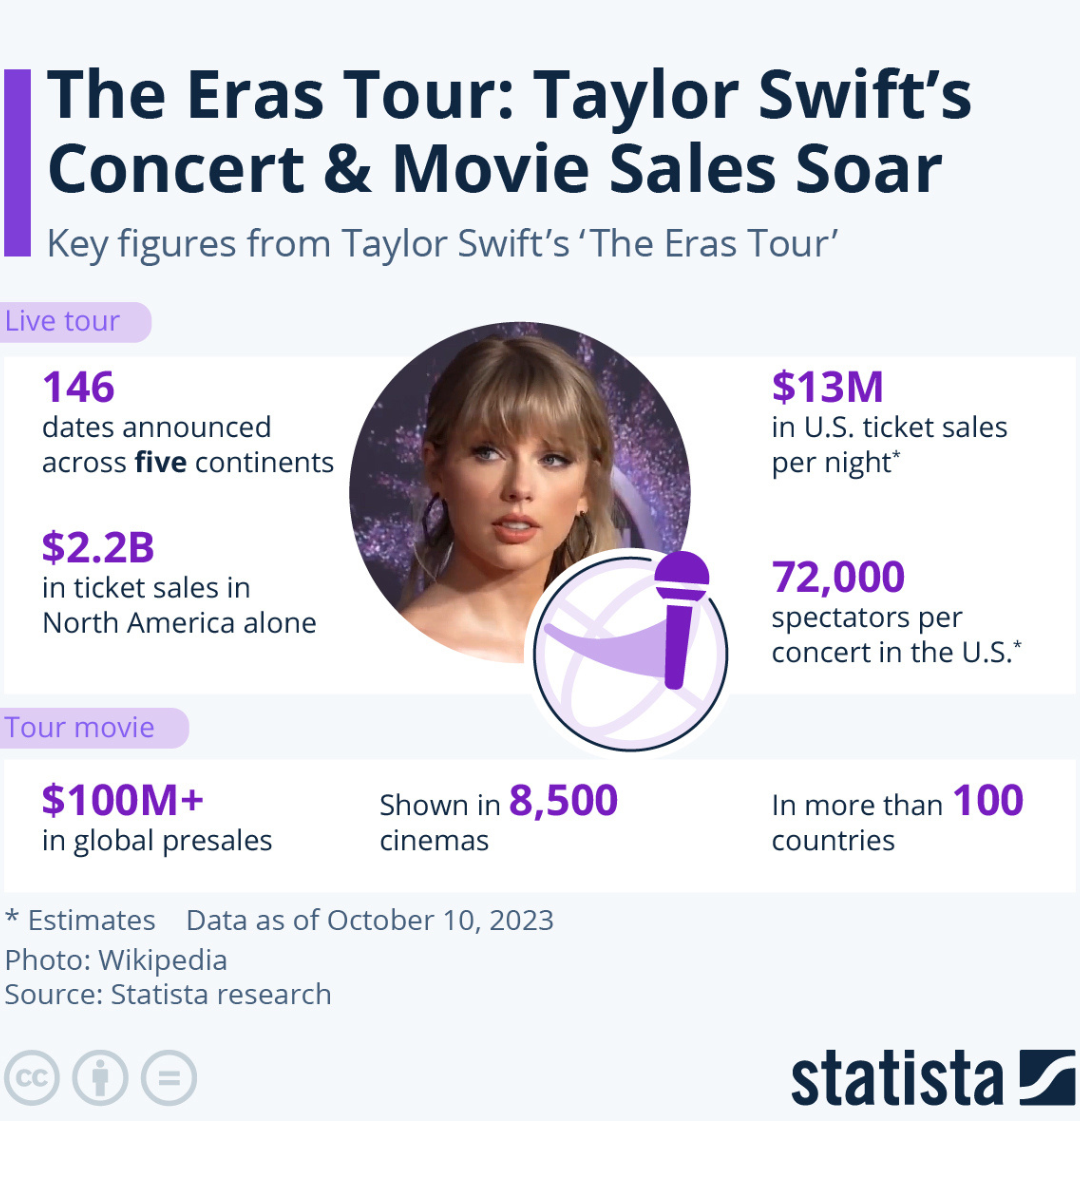 A graphic representation of stats associated with Taylor Swift's Eras Tour